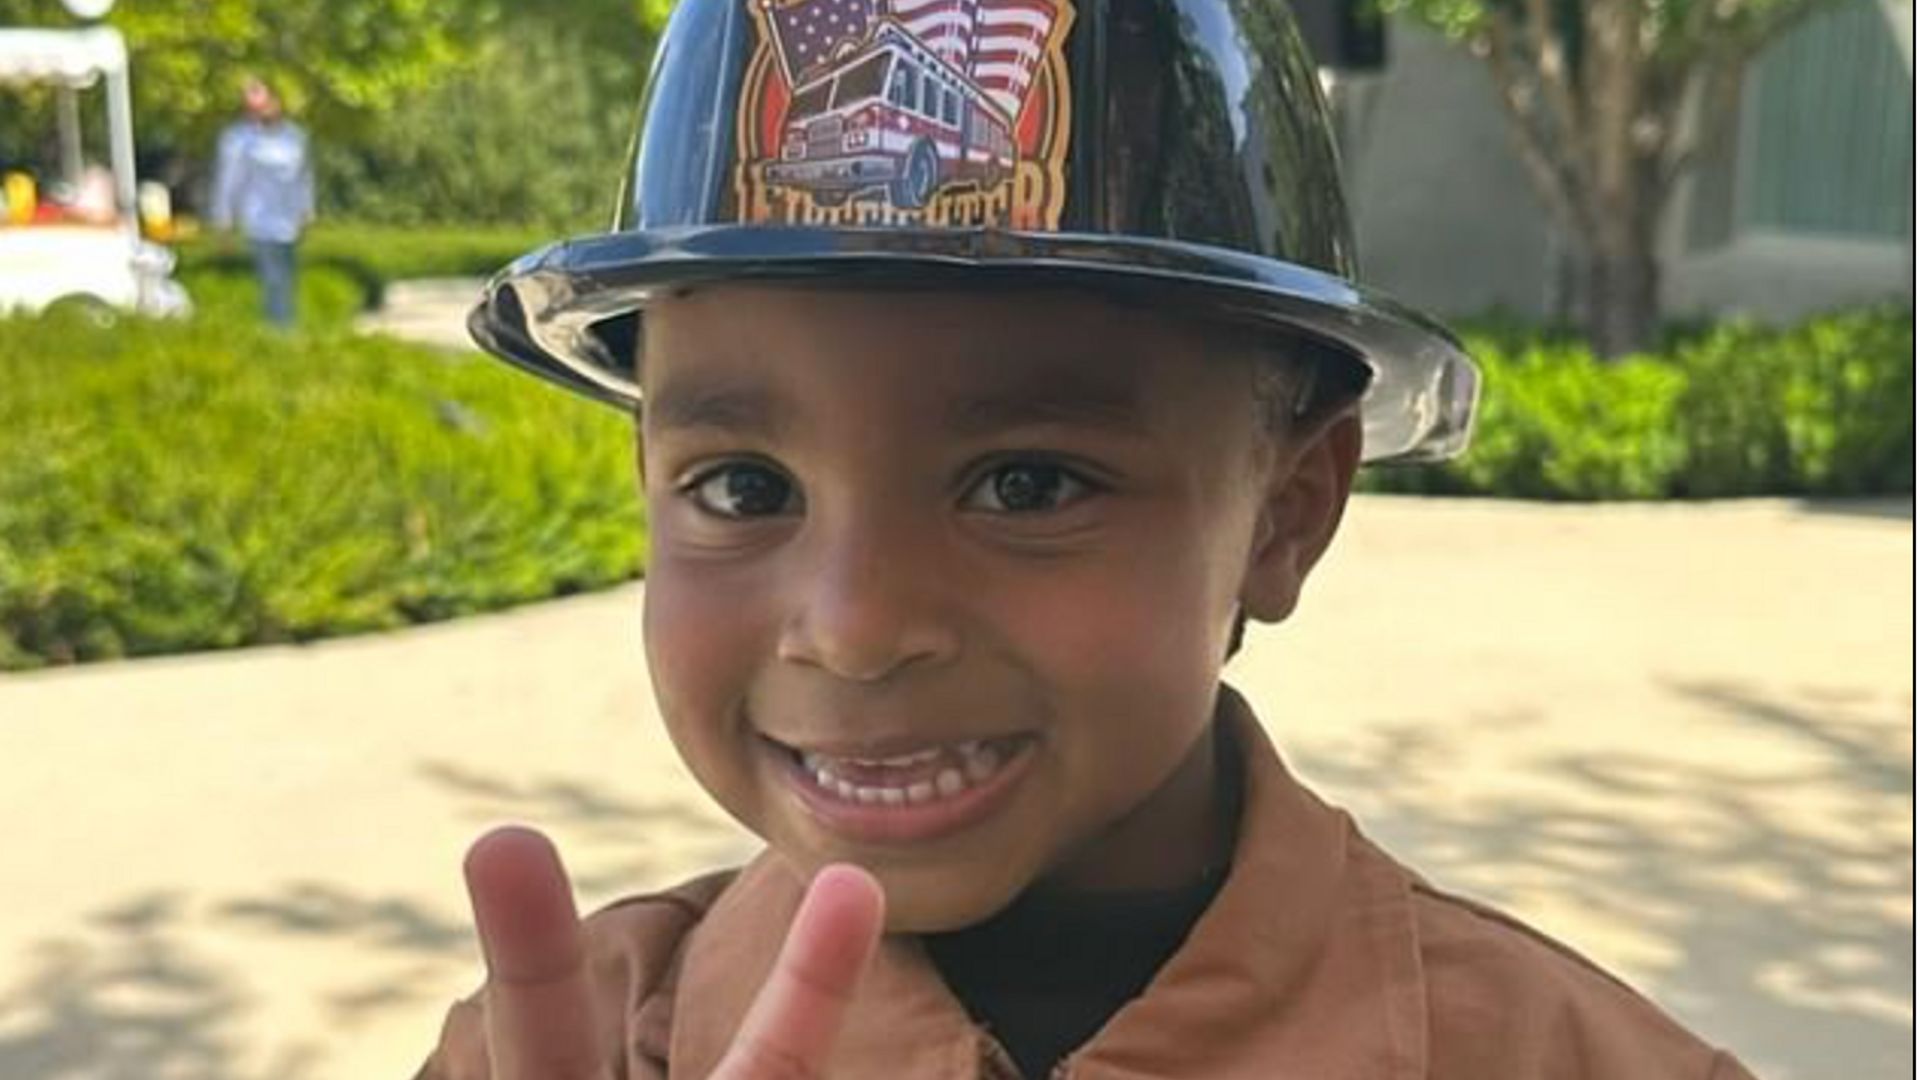 Kim's son dressed up as a fireman